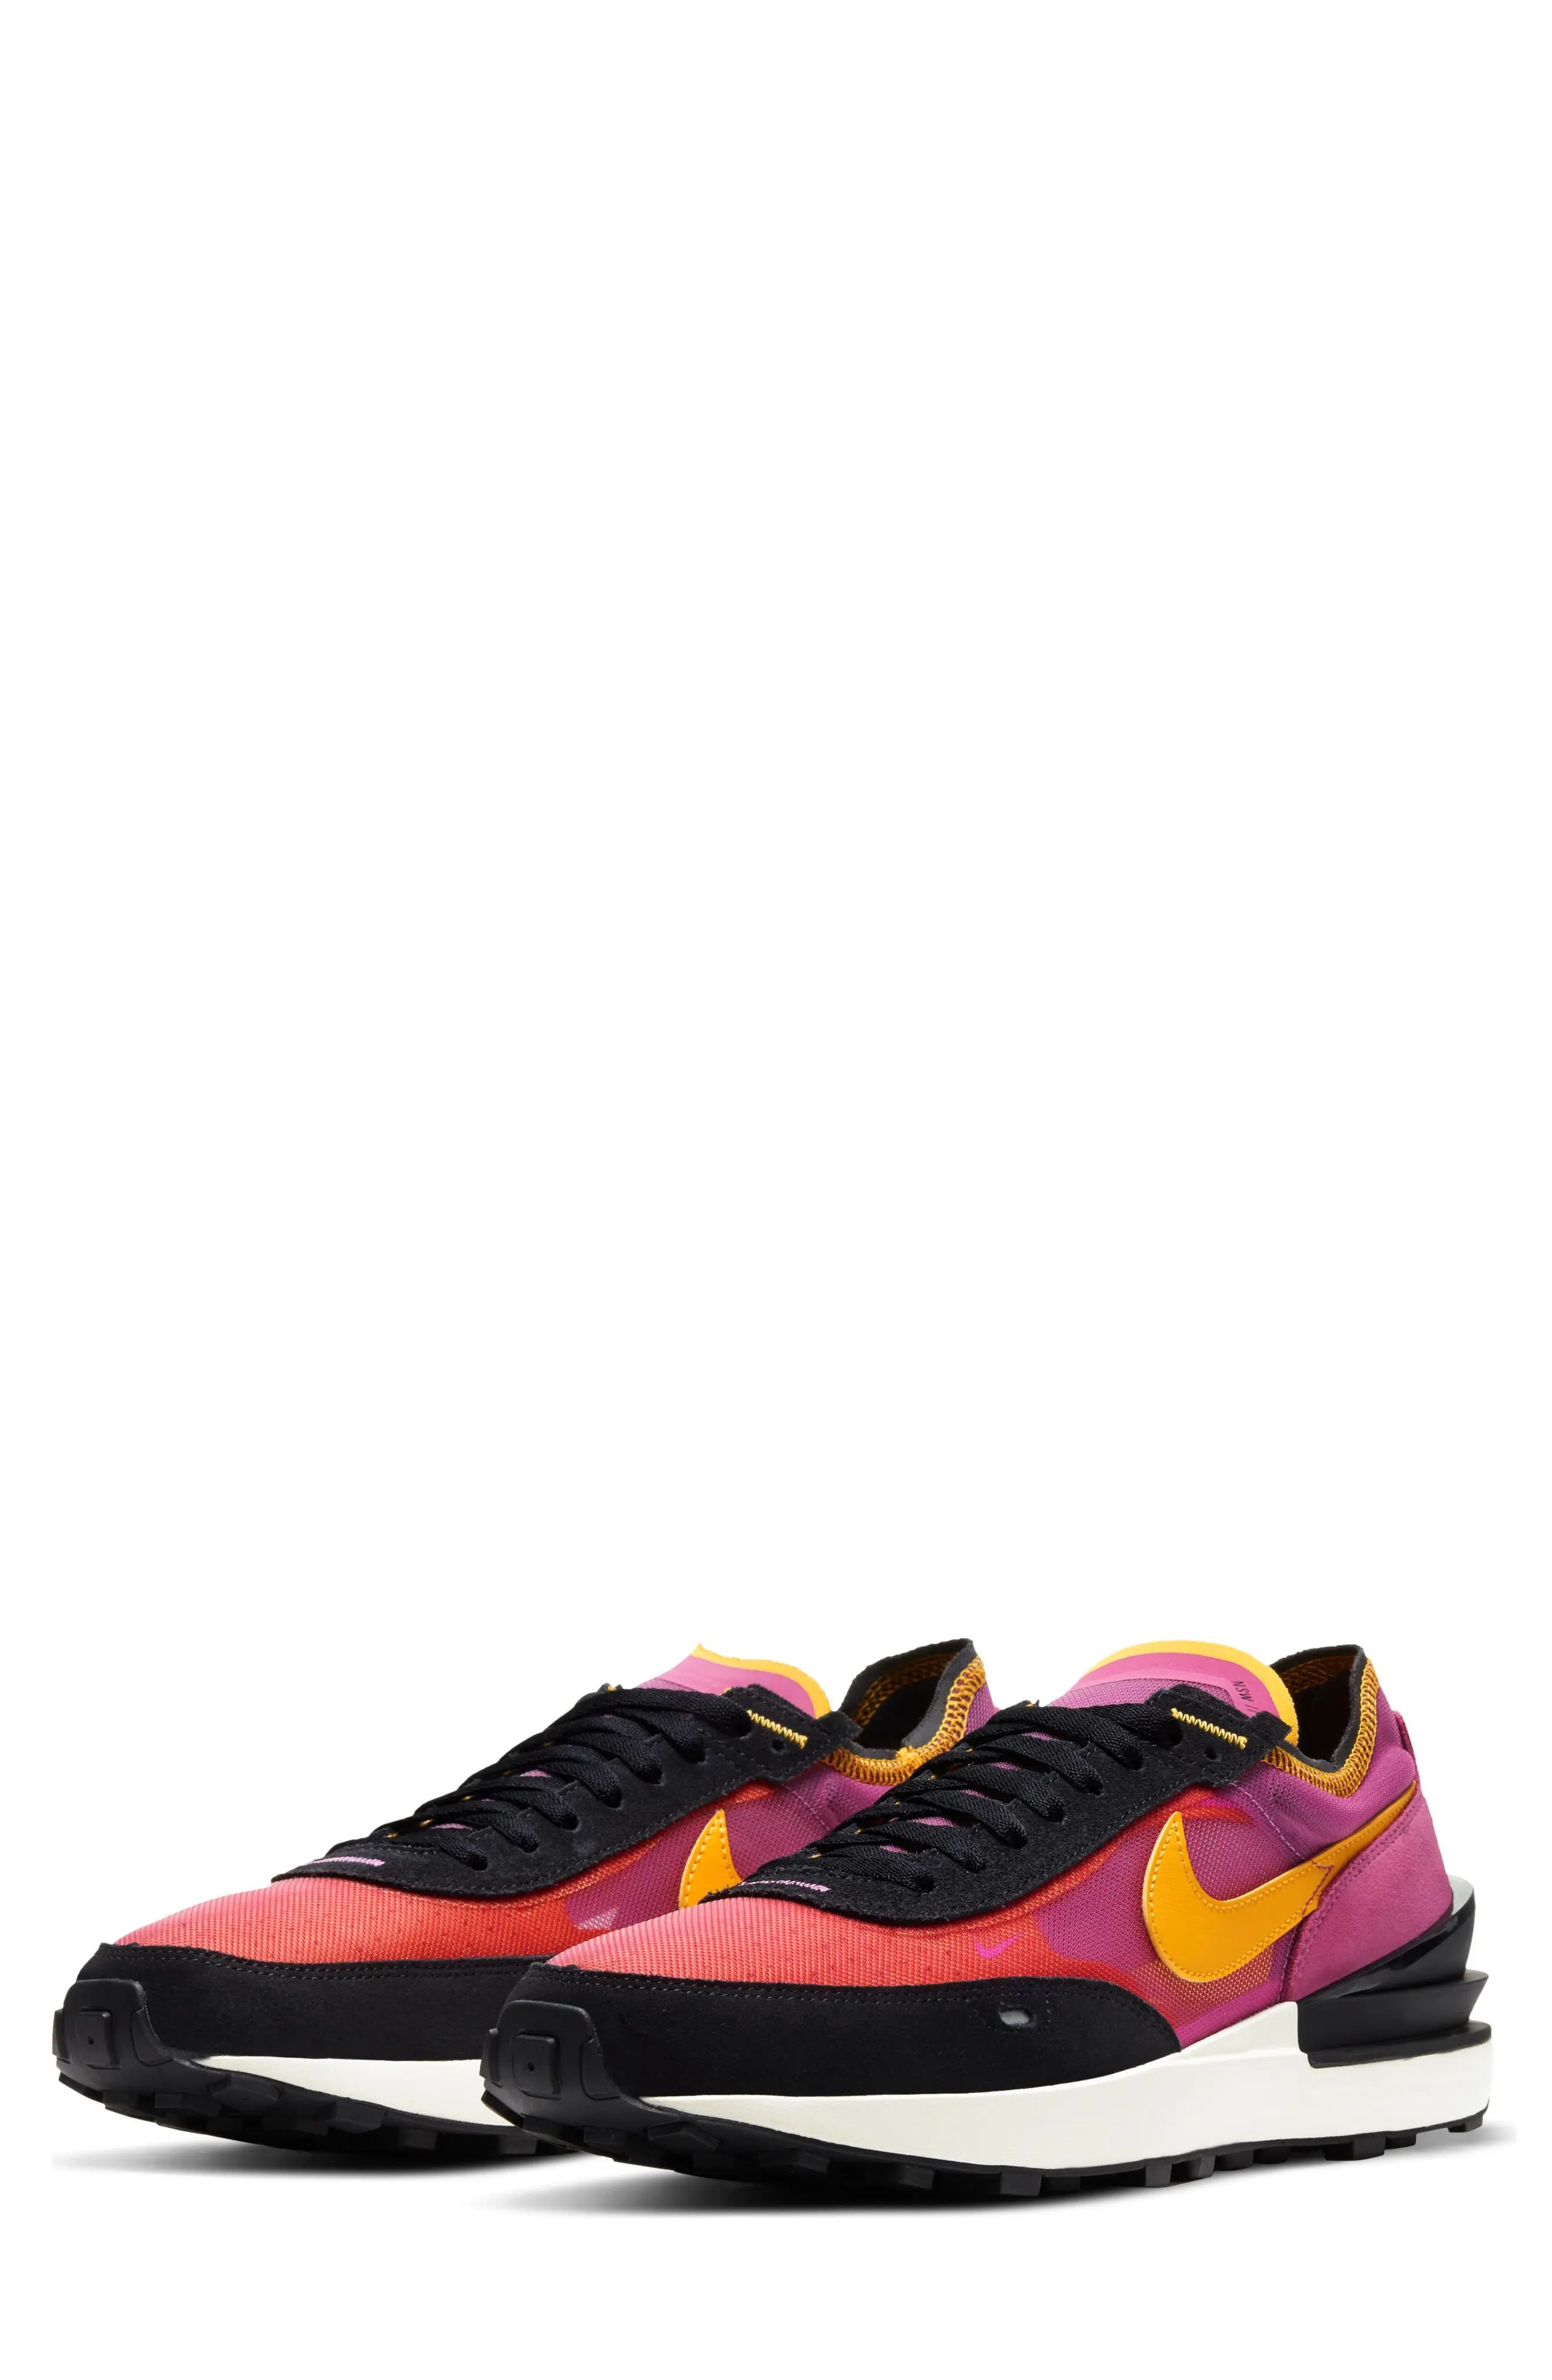 Nike Waffle One Sneaker, Size 7 in Fuchsia/University Gold at Nordstrom | Nordstrom